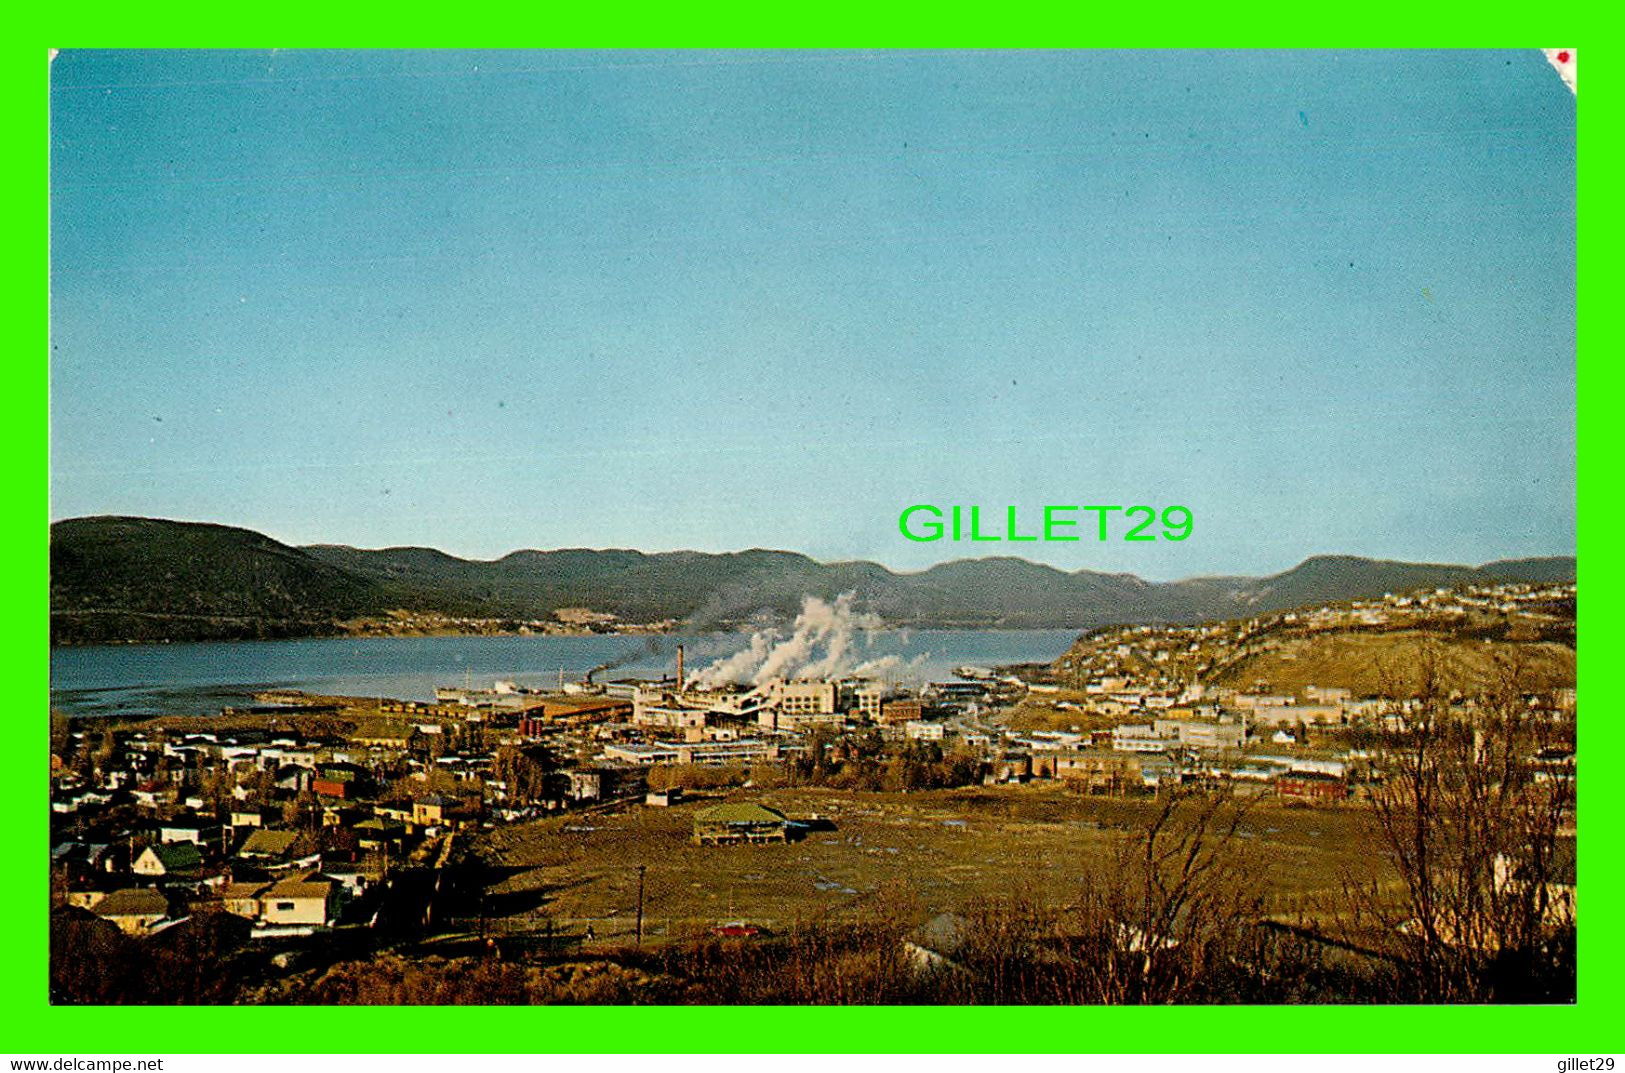 CORNER BROOK, NEW-FOUNDLAND - BOWATER'S PAPER MILL, THE CITY AND BAY OF ISLANDS - TRAVEL IN 1983 - - Other & Unclassified